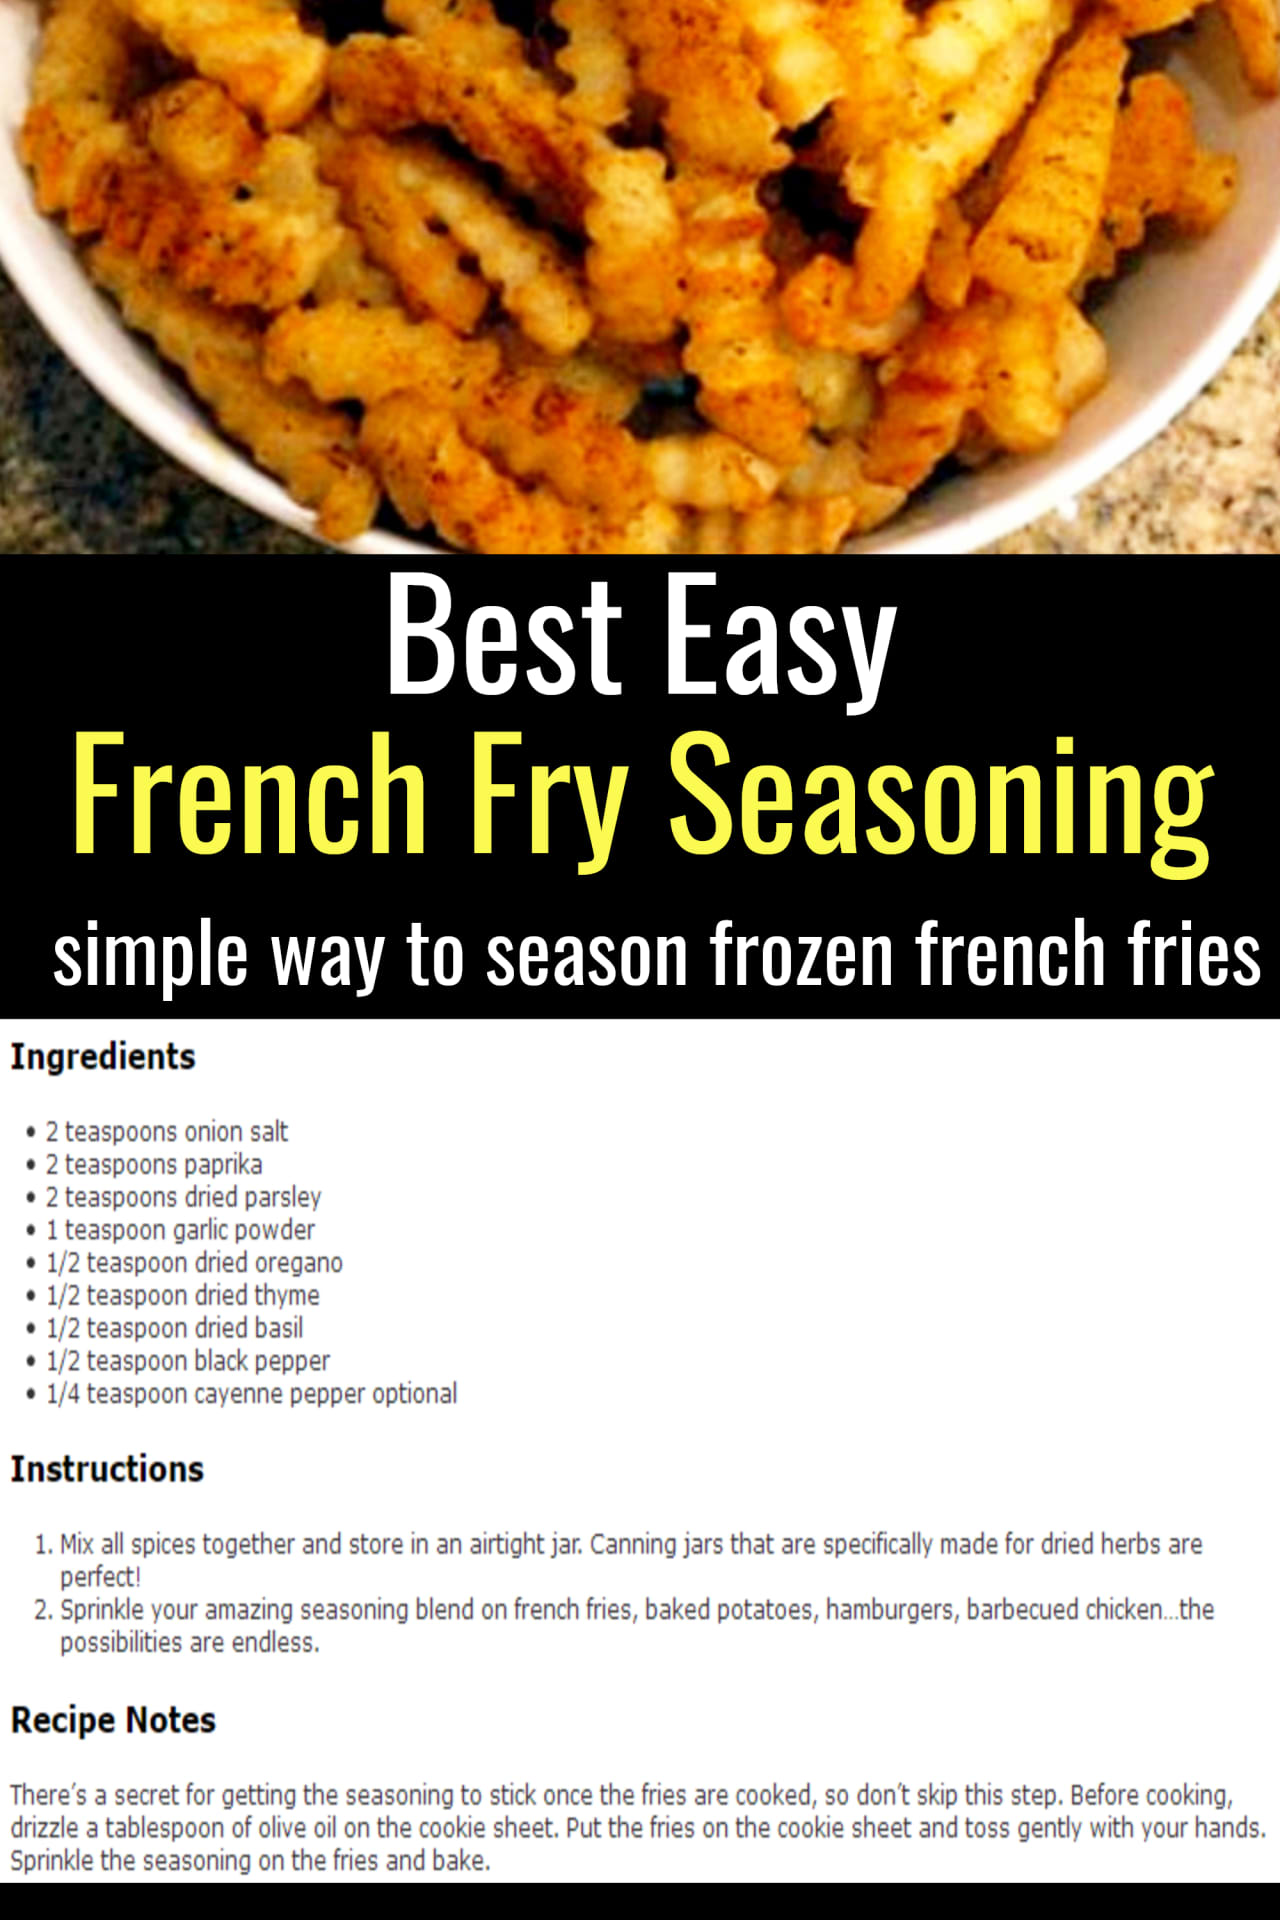 best easy french fry seasoning - recipe ideas for the family with picky eater kids